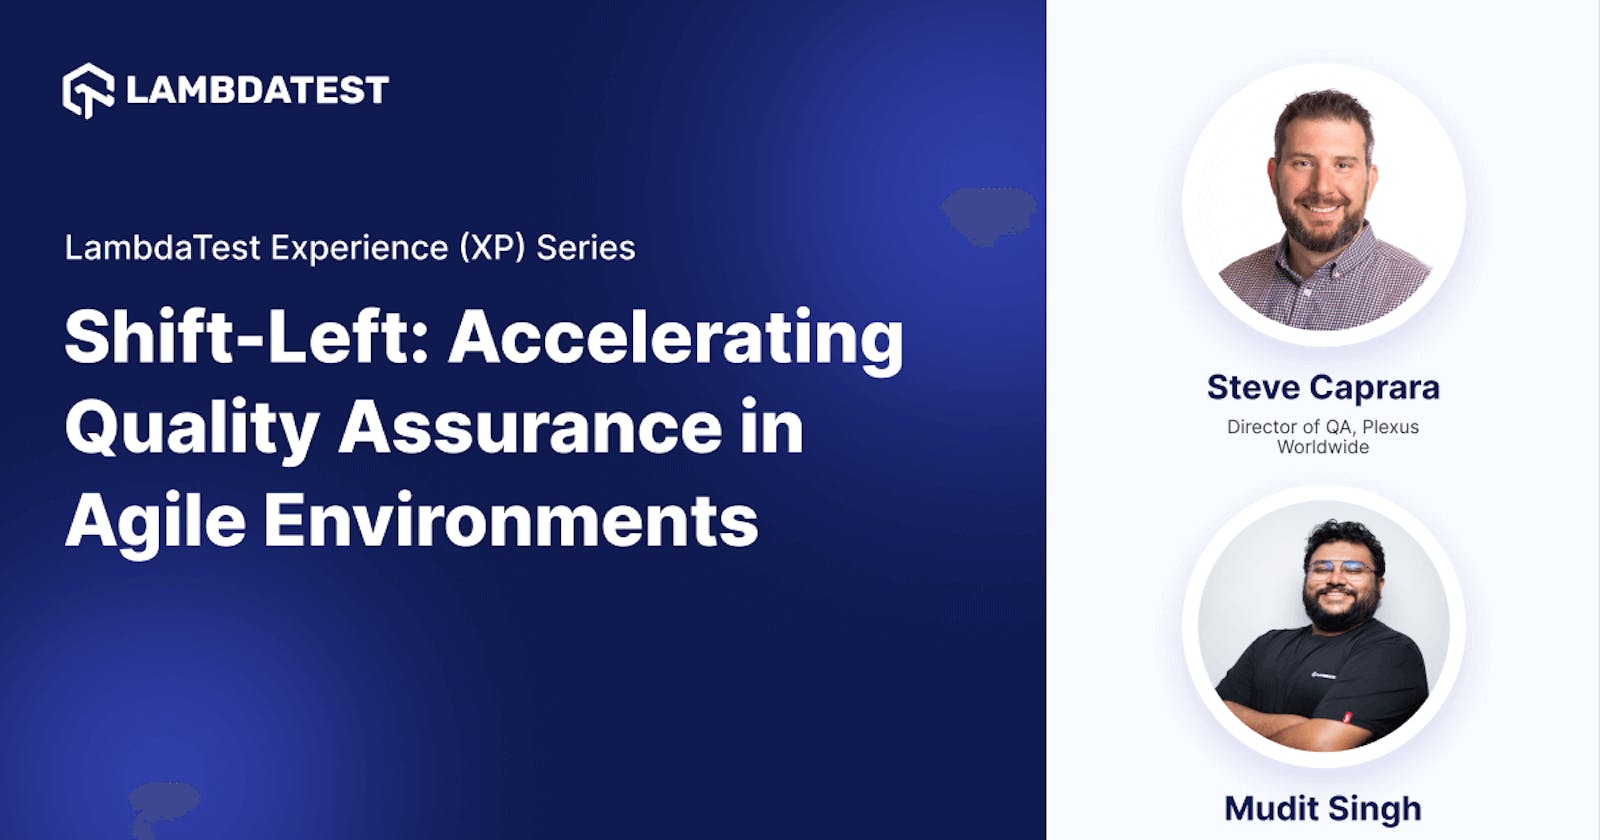 Webinar: Shift-Left: Accelerating Quality Assurance in Agile Environments [Experience (XP) Series]